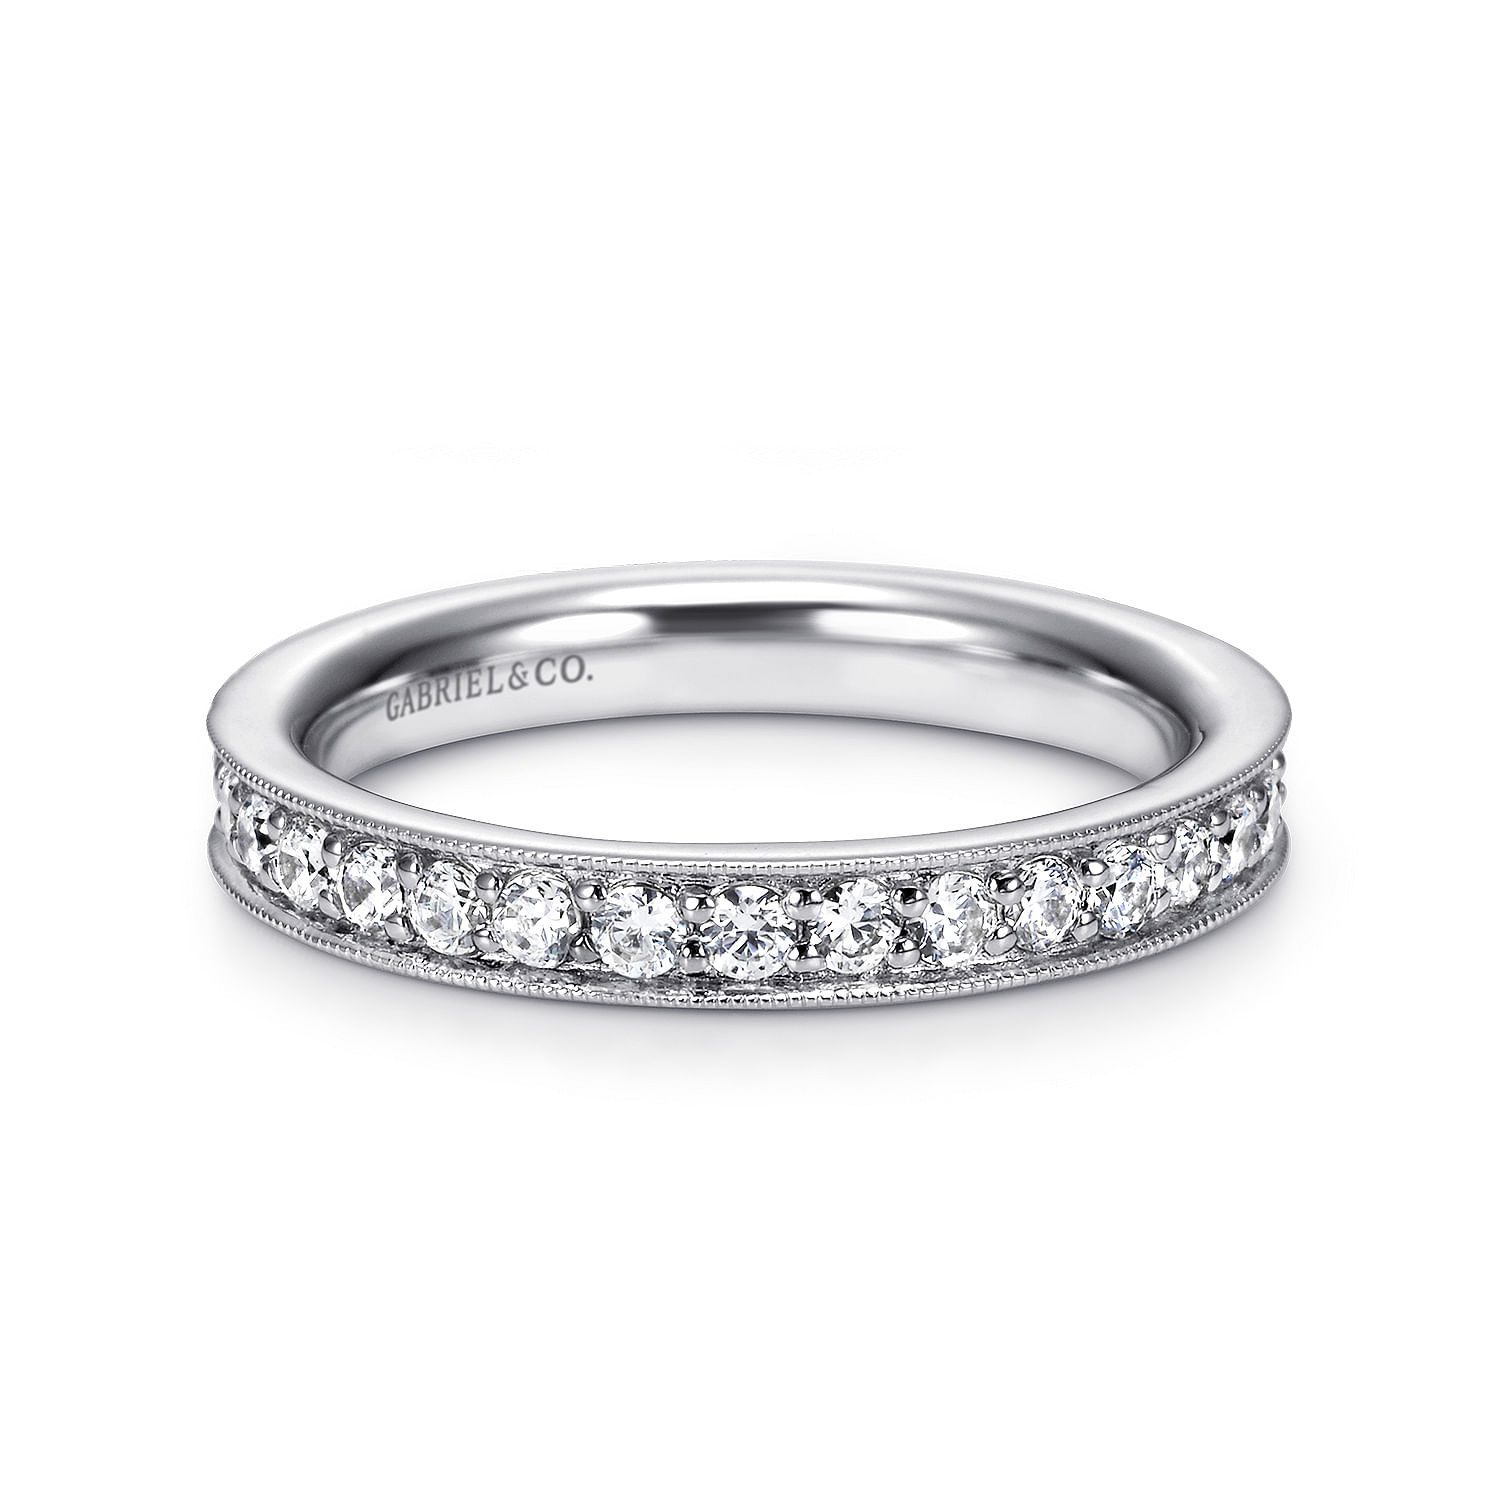 Gabriel - 14K White Gold Channel Prong Diamond Eternity Band with Milgrain